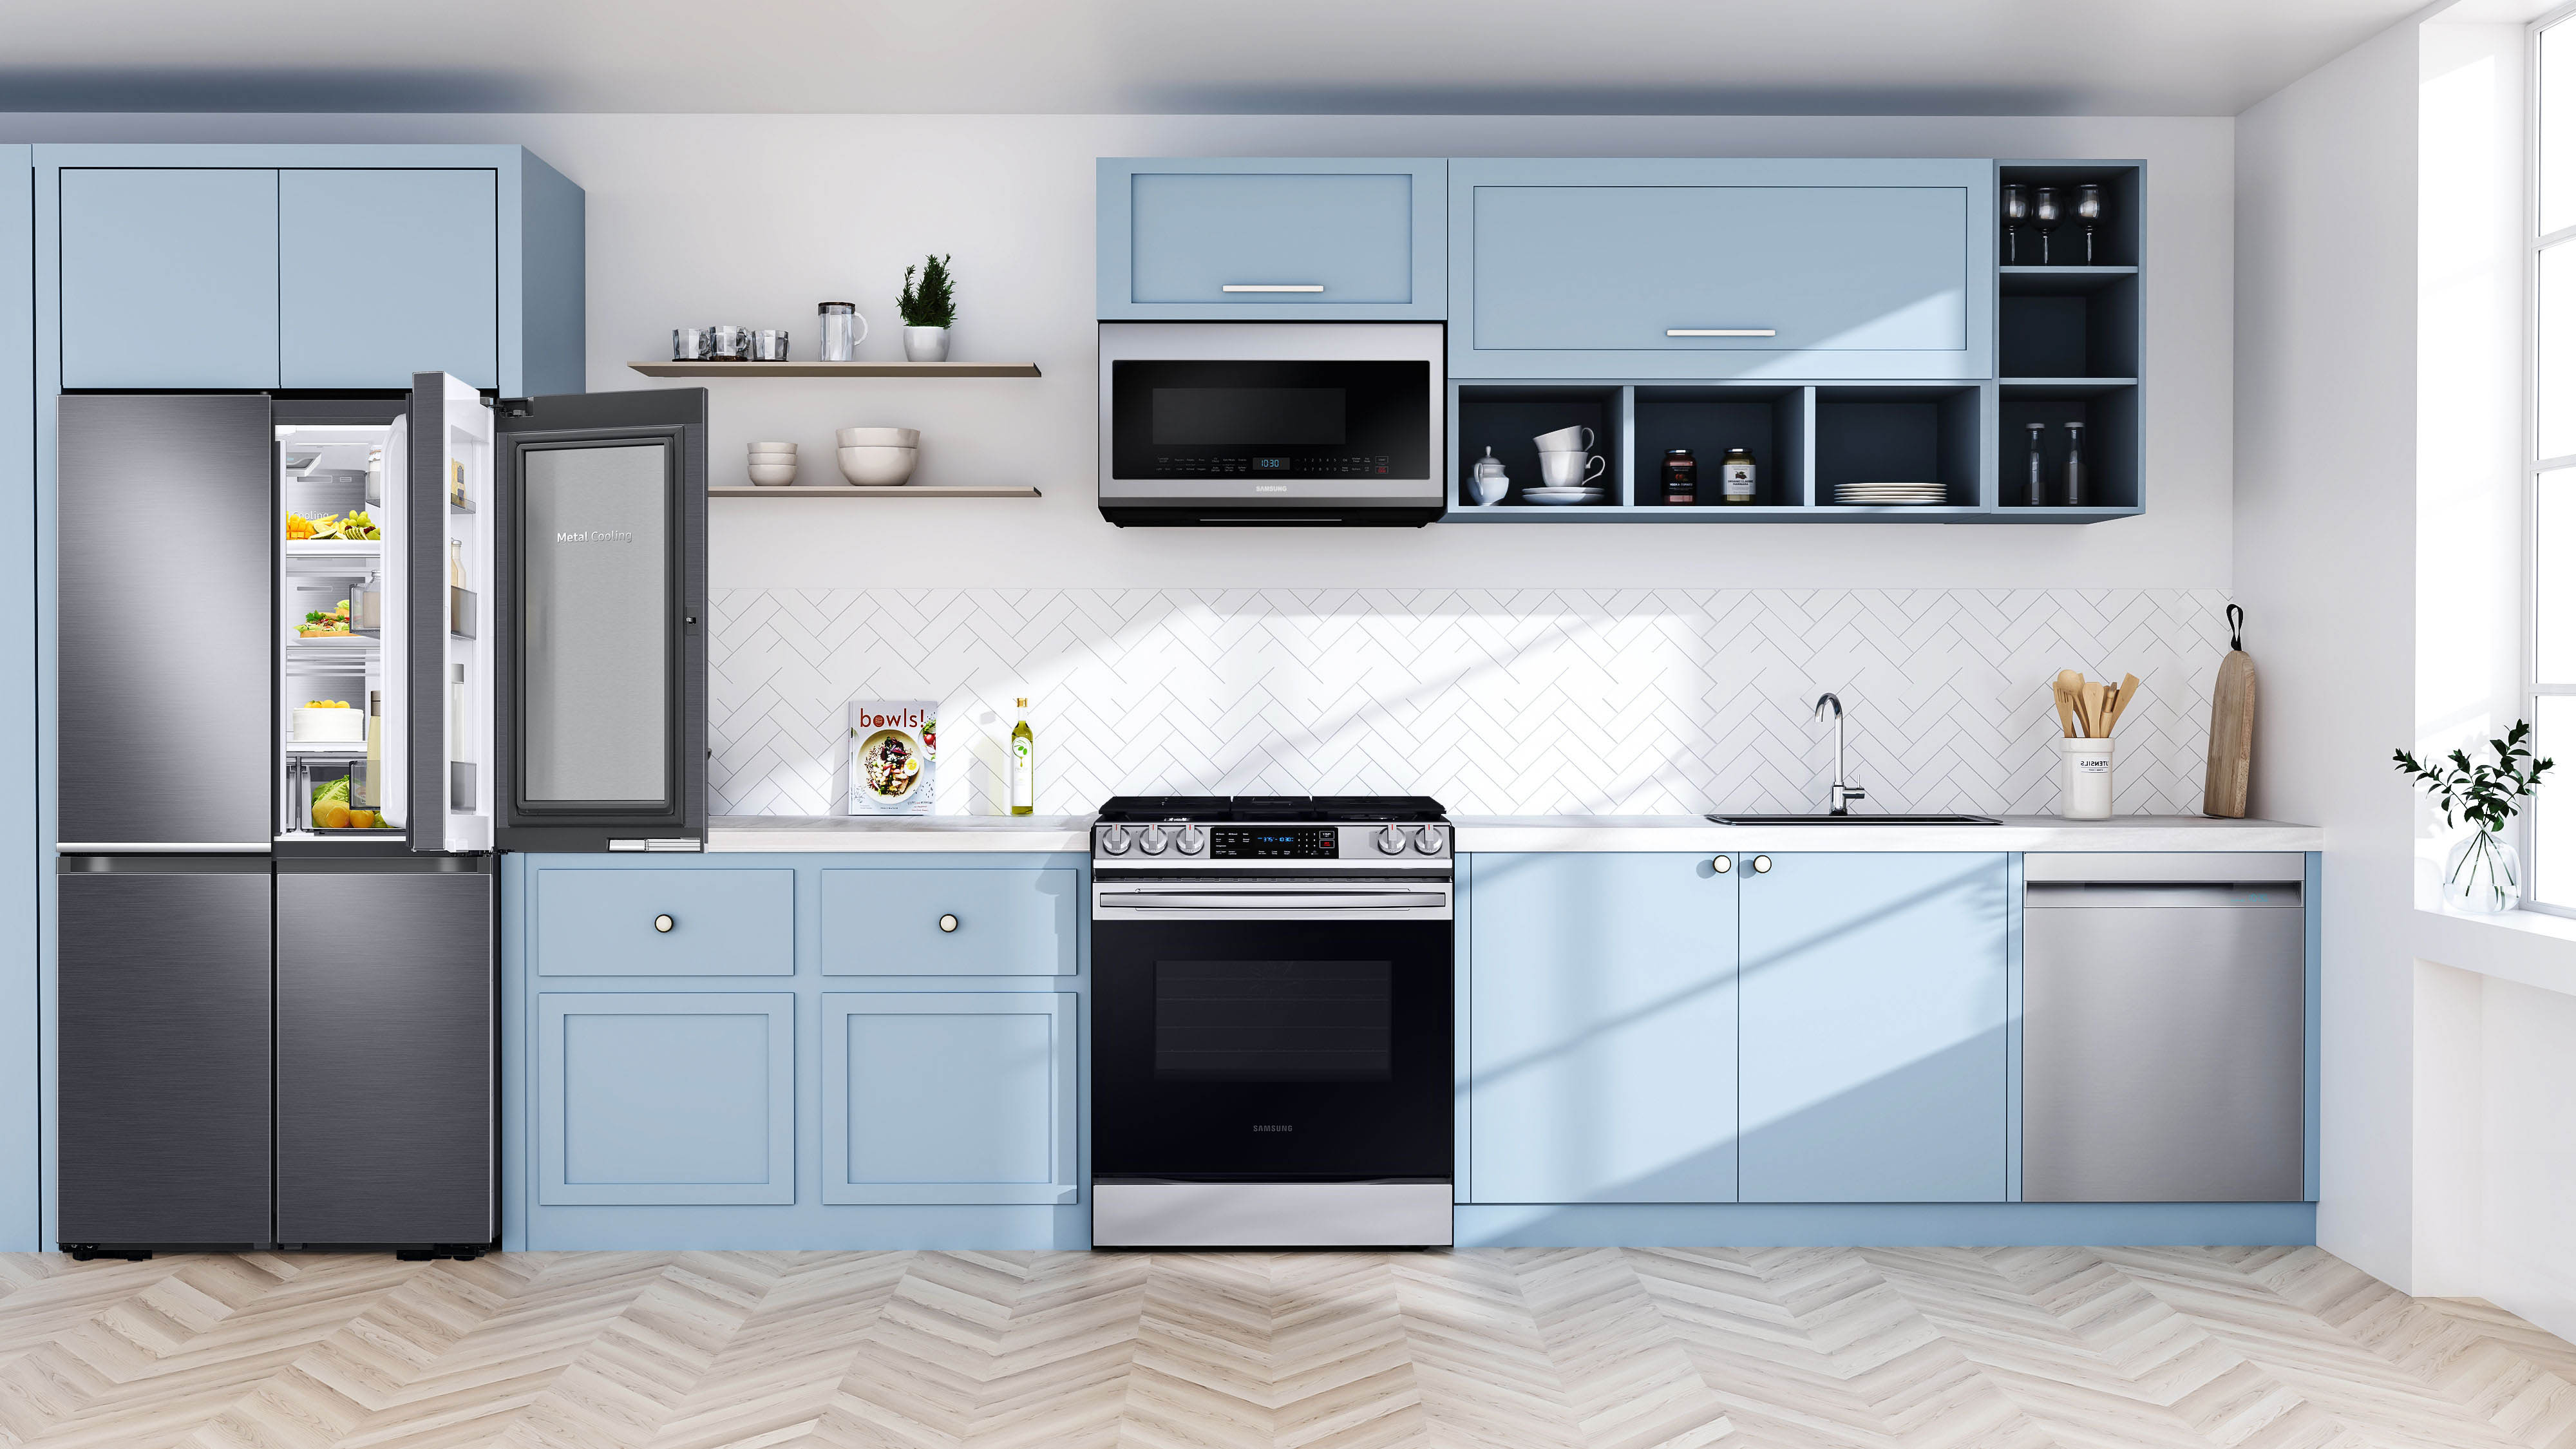 Keep your house in perfect order with these upgraded home appliances from Samsung